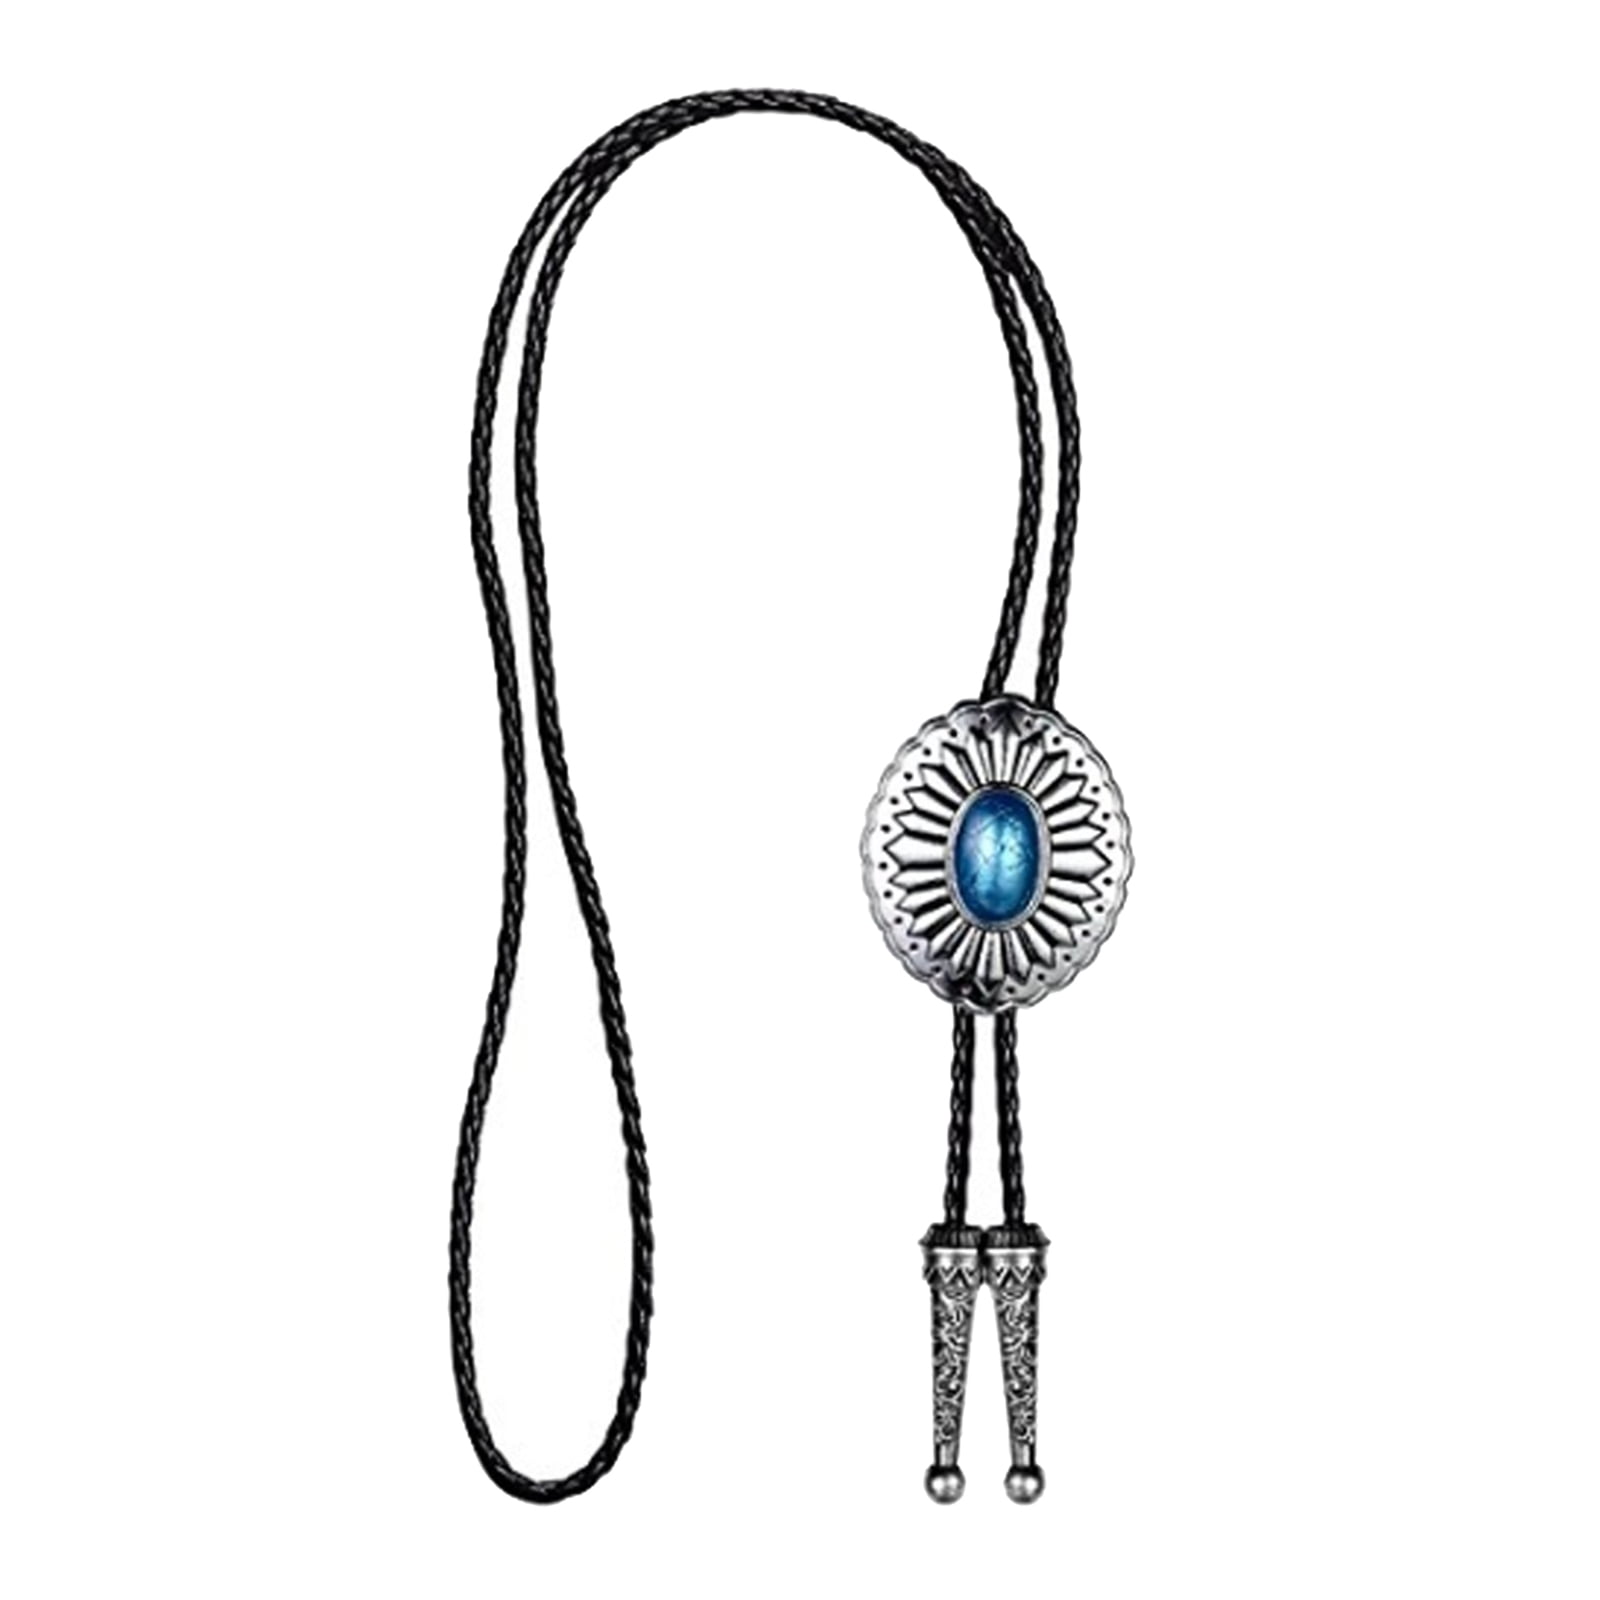 NEW TURQUOISE COLOUR BOLO BOOTLACE TIE SILVER METAL LEATHER CORD WESTERN COWBOY 